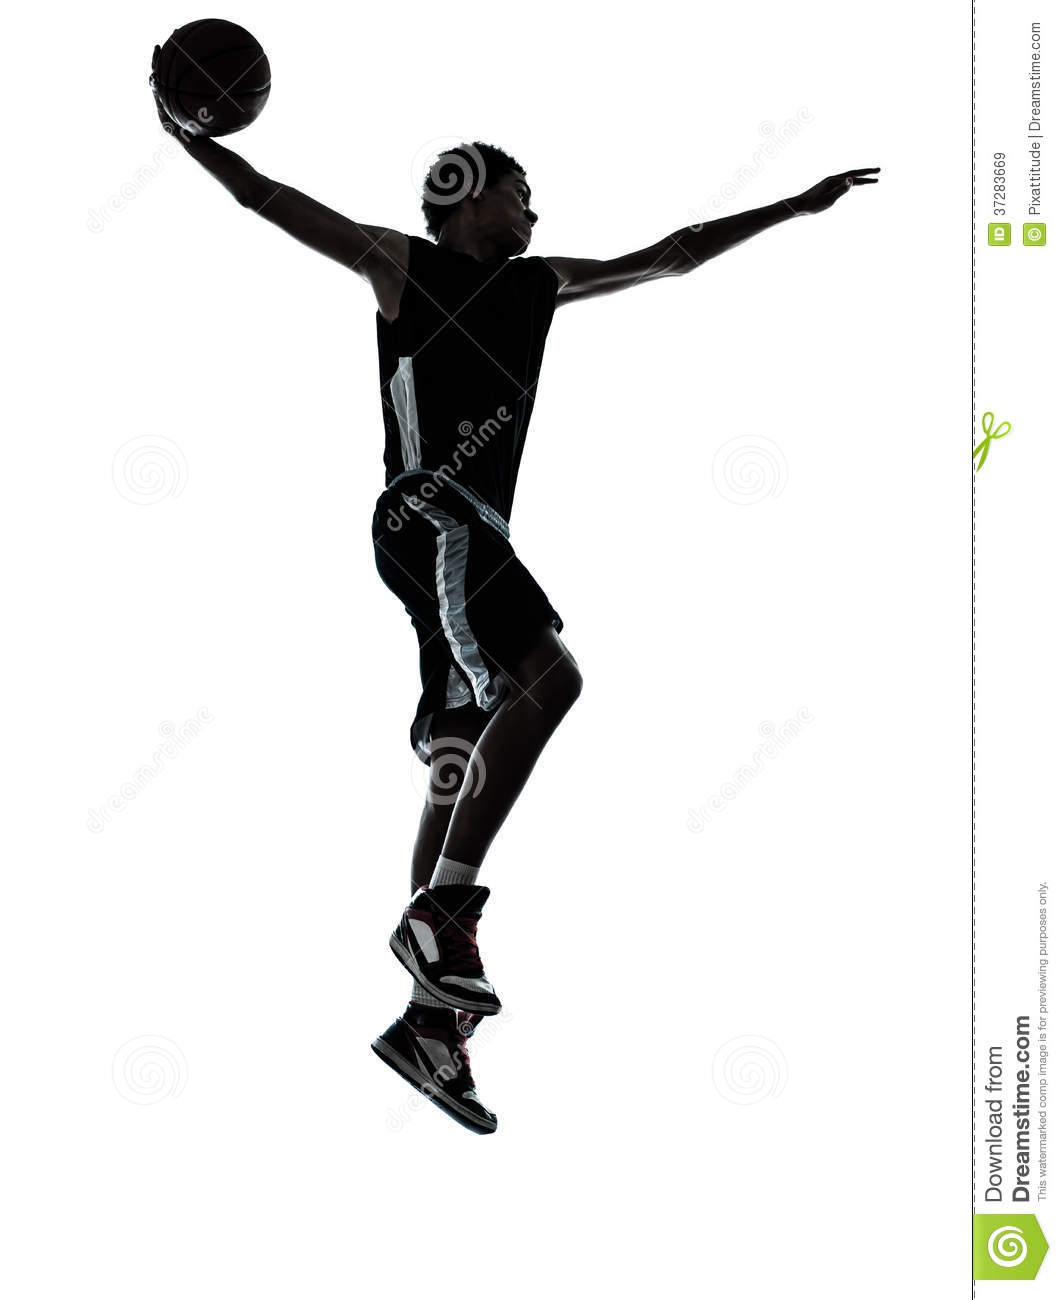 Basketball Player Dunking Silhouette Royalty Free Stock Images   Image